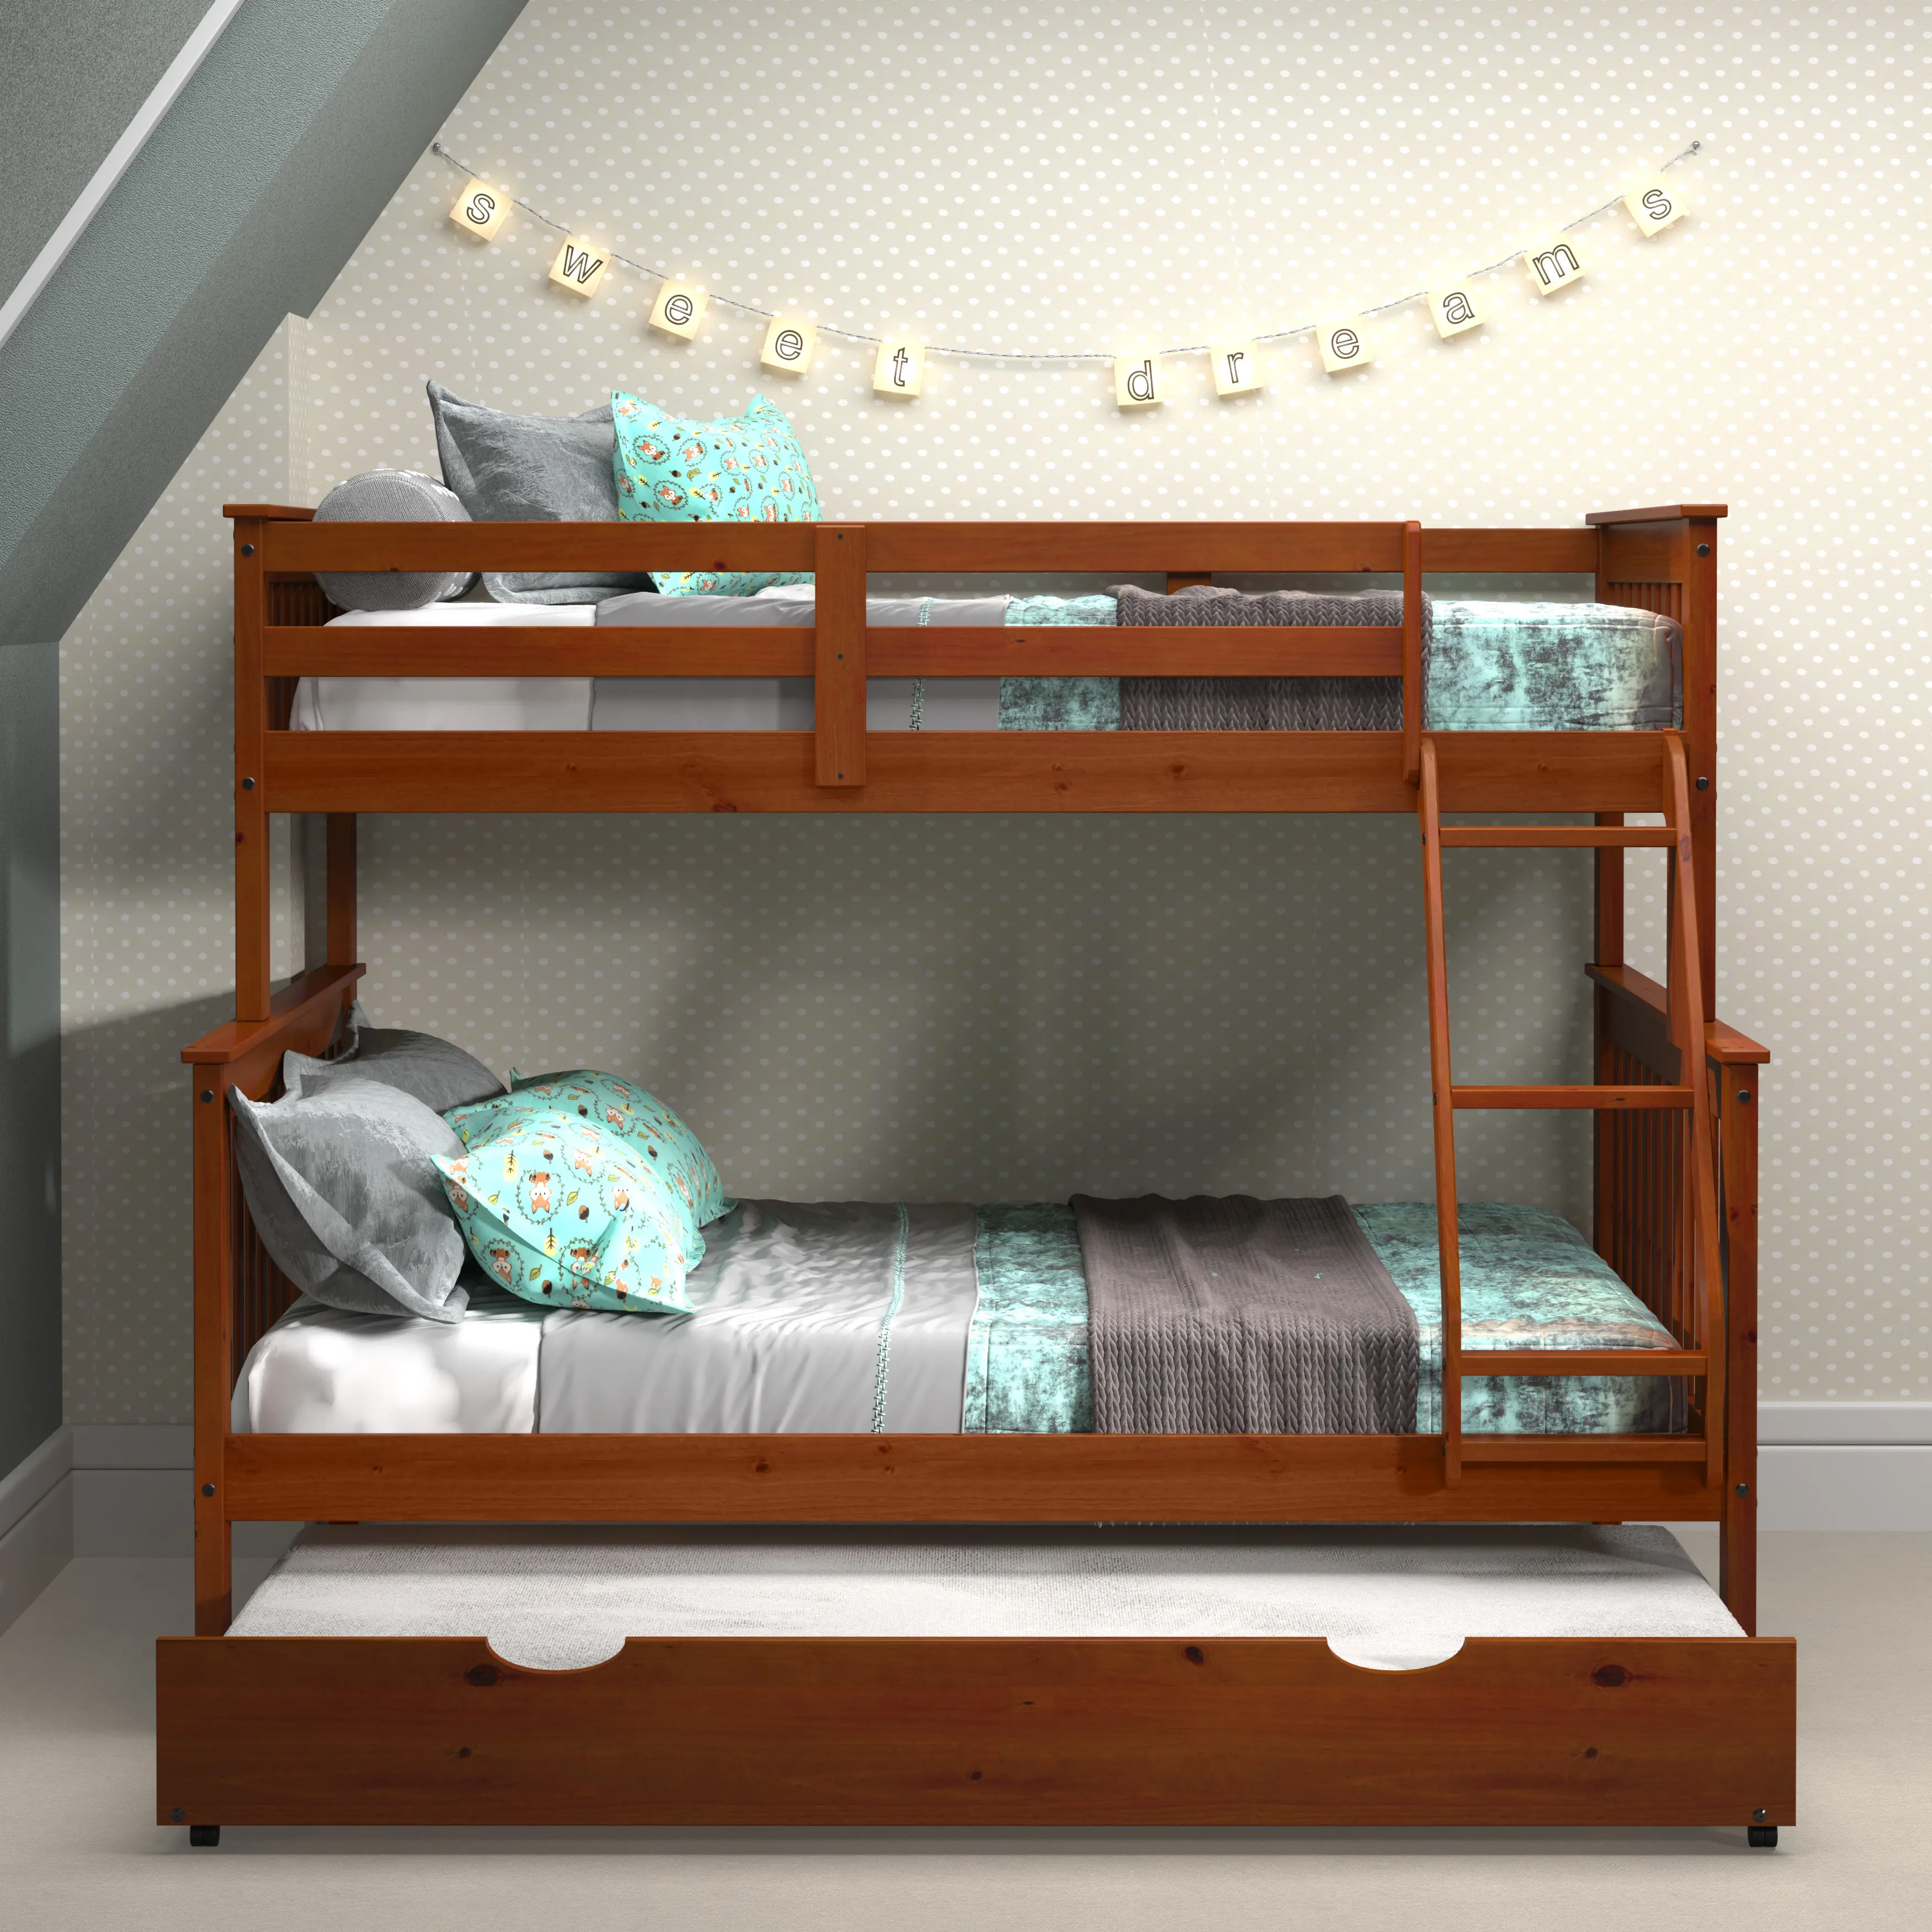 122-3-TFE503-E Brown Twin-over-Full Bunk Bed with Trundle - Craft sku 122-3-TFE503-E